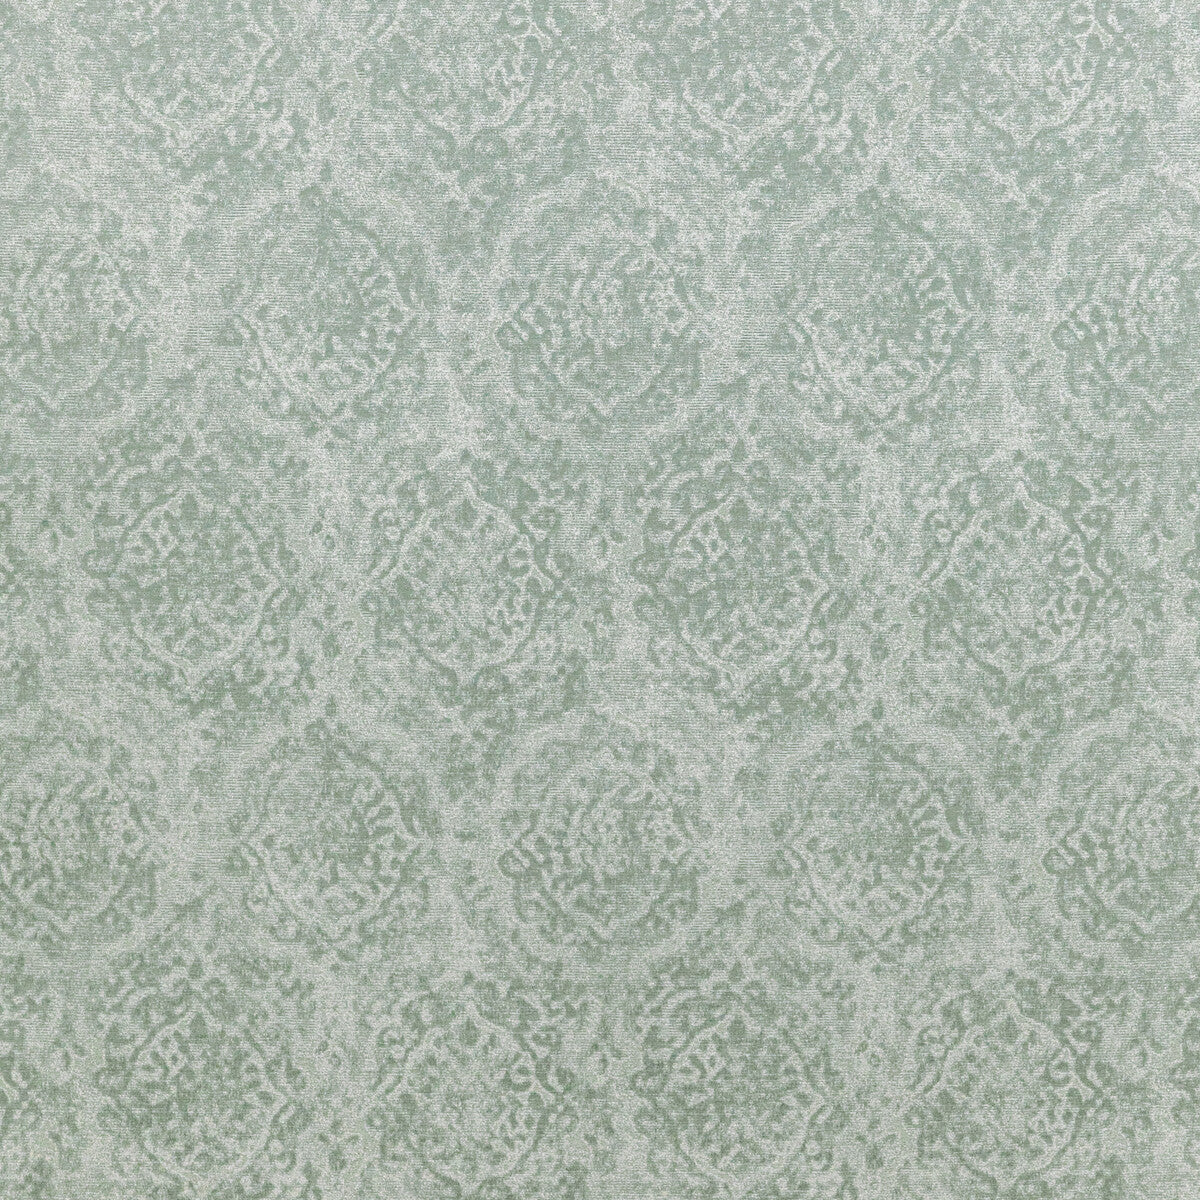 Omni Damask fabric in mist color - pattern 36577.13.0 - by Kravet Couture in the Modern Luxe Silk Luster collection